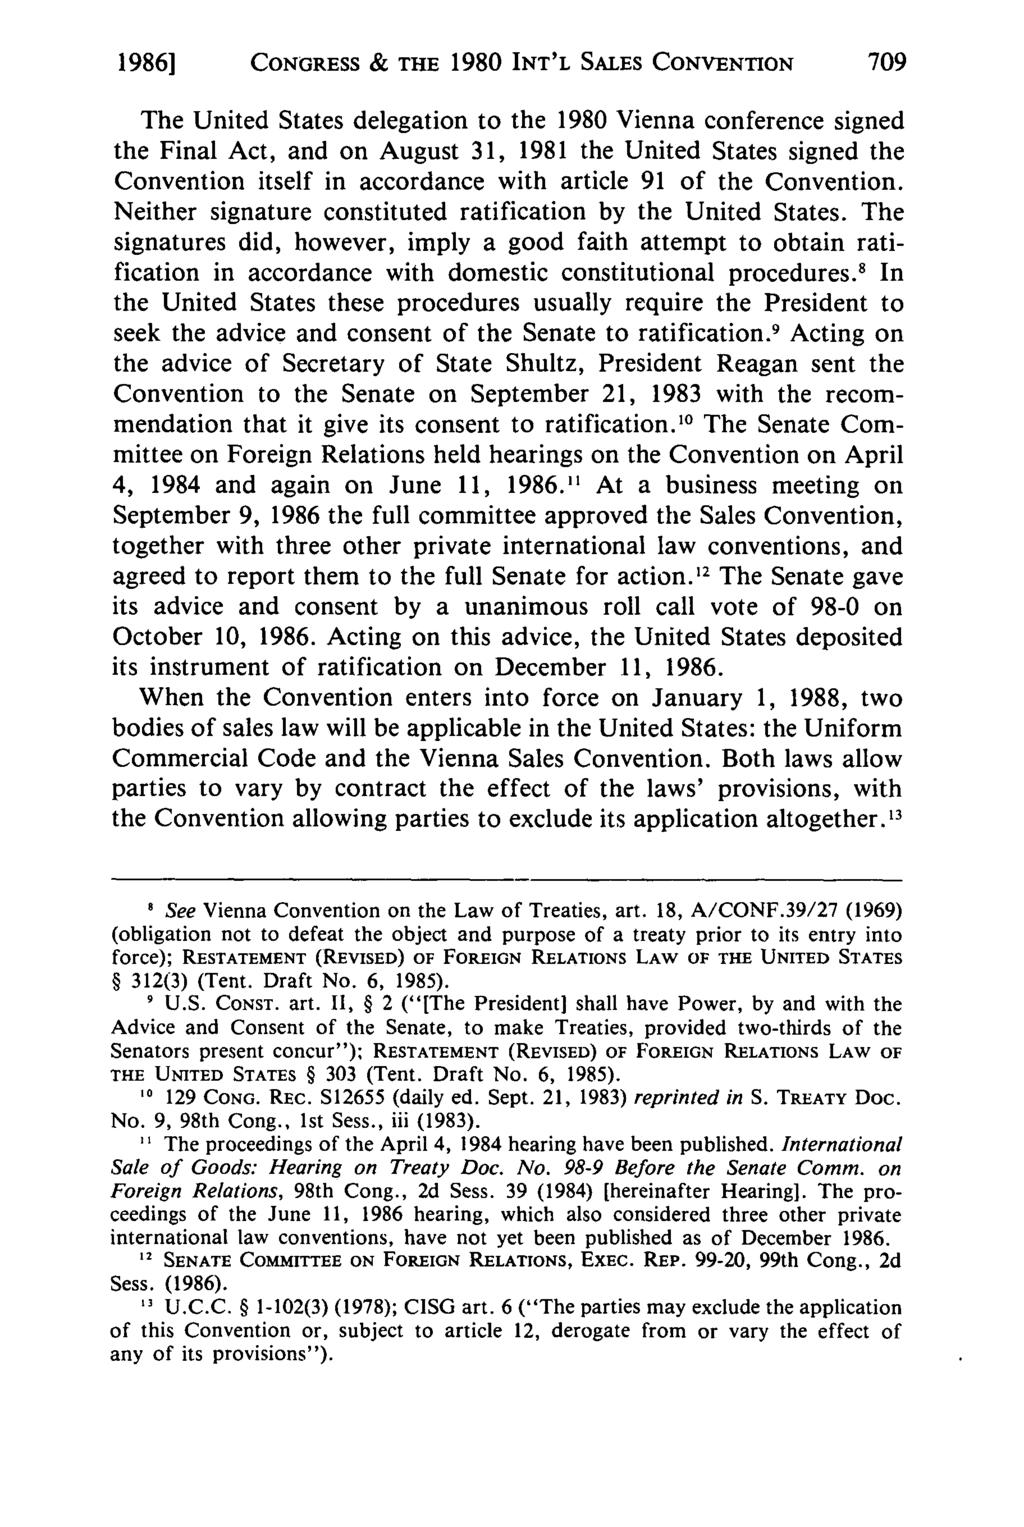 1986] CONGRESS & THE 1980 INT'L SALES CONVENTION The United States delegation to the 1980 Vienna conference signed the Final Act, and on August 31, 1981 the United States signed the Convention itself